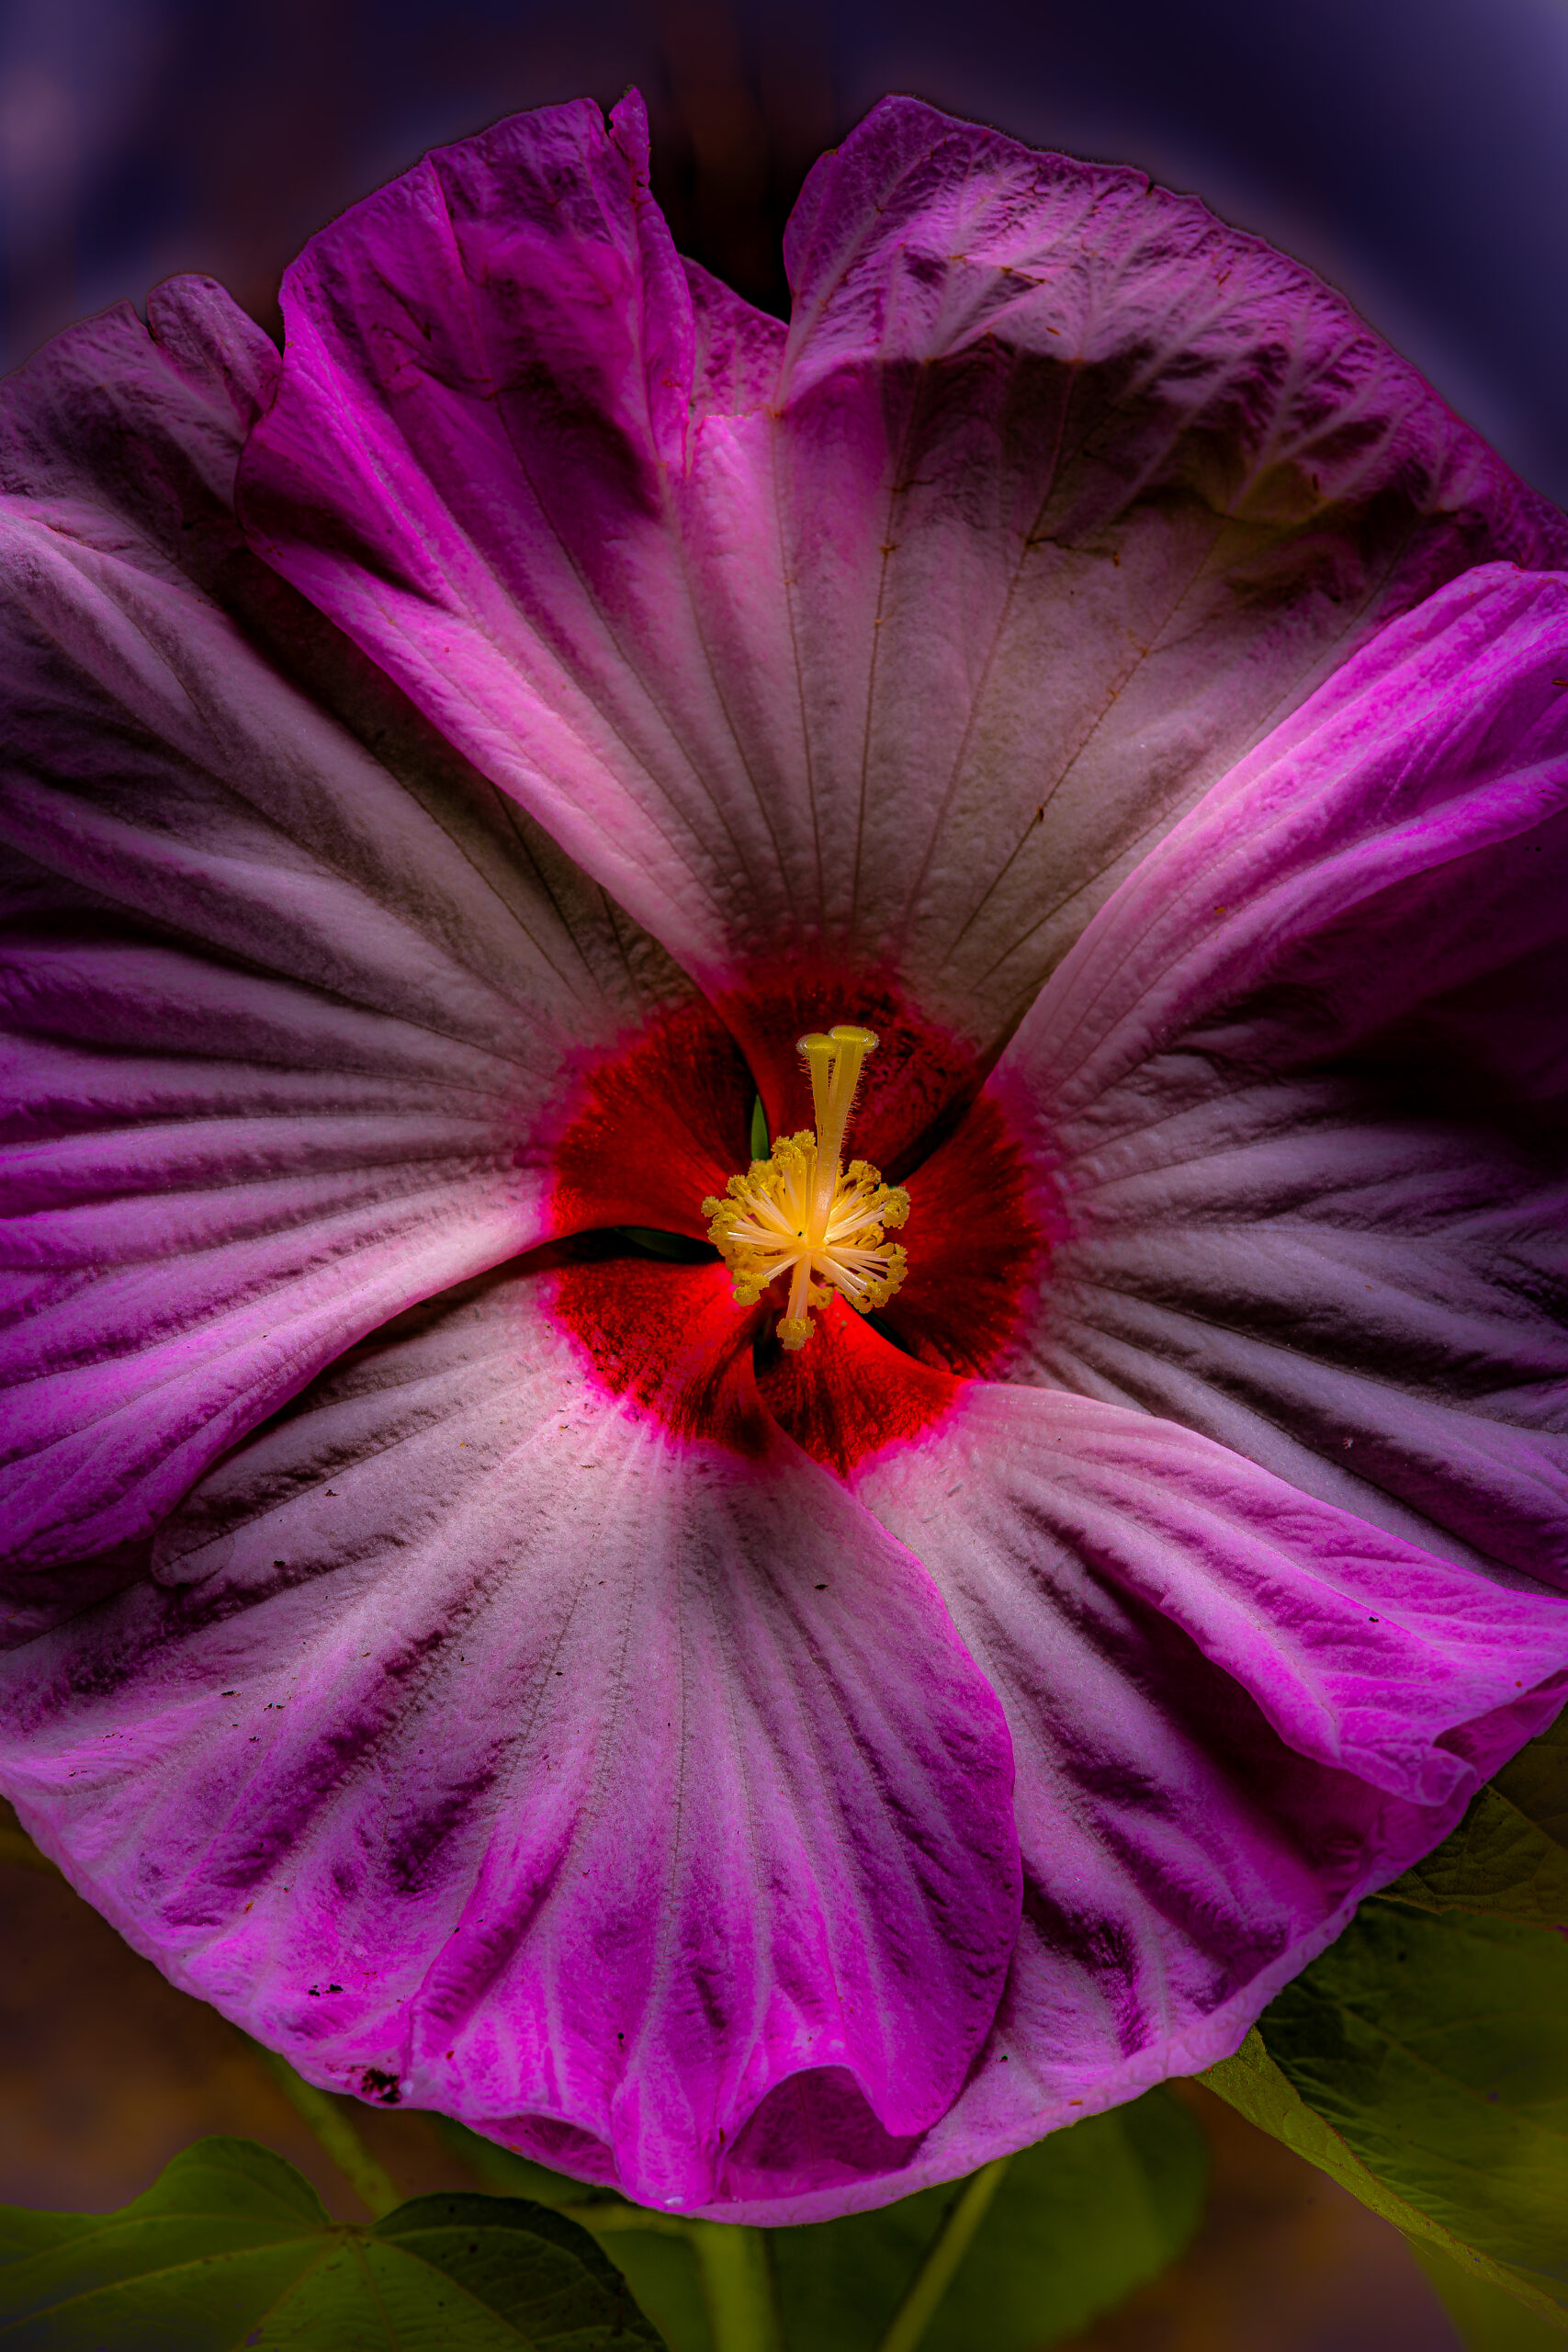 Pink Hibiscus flower macro close up photo by Glen Couvillion